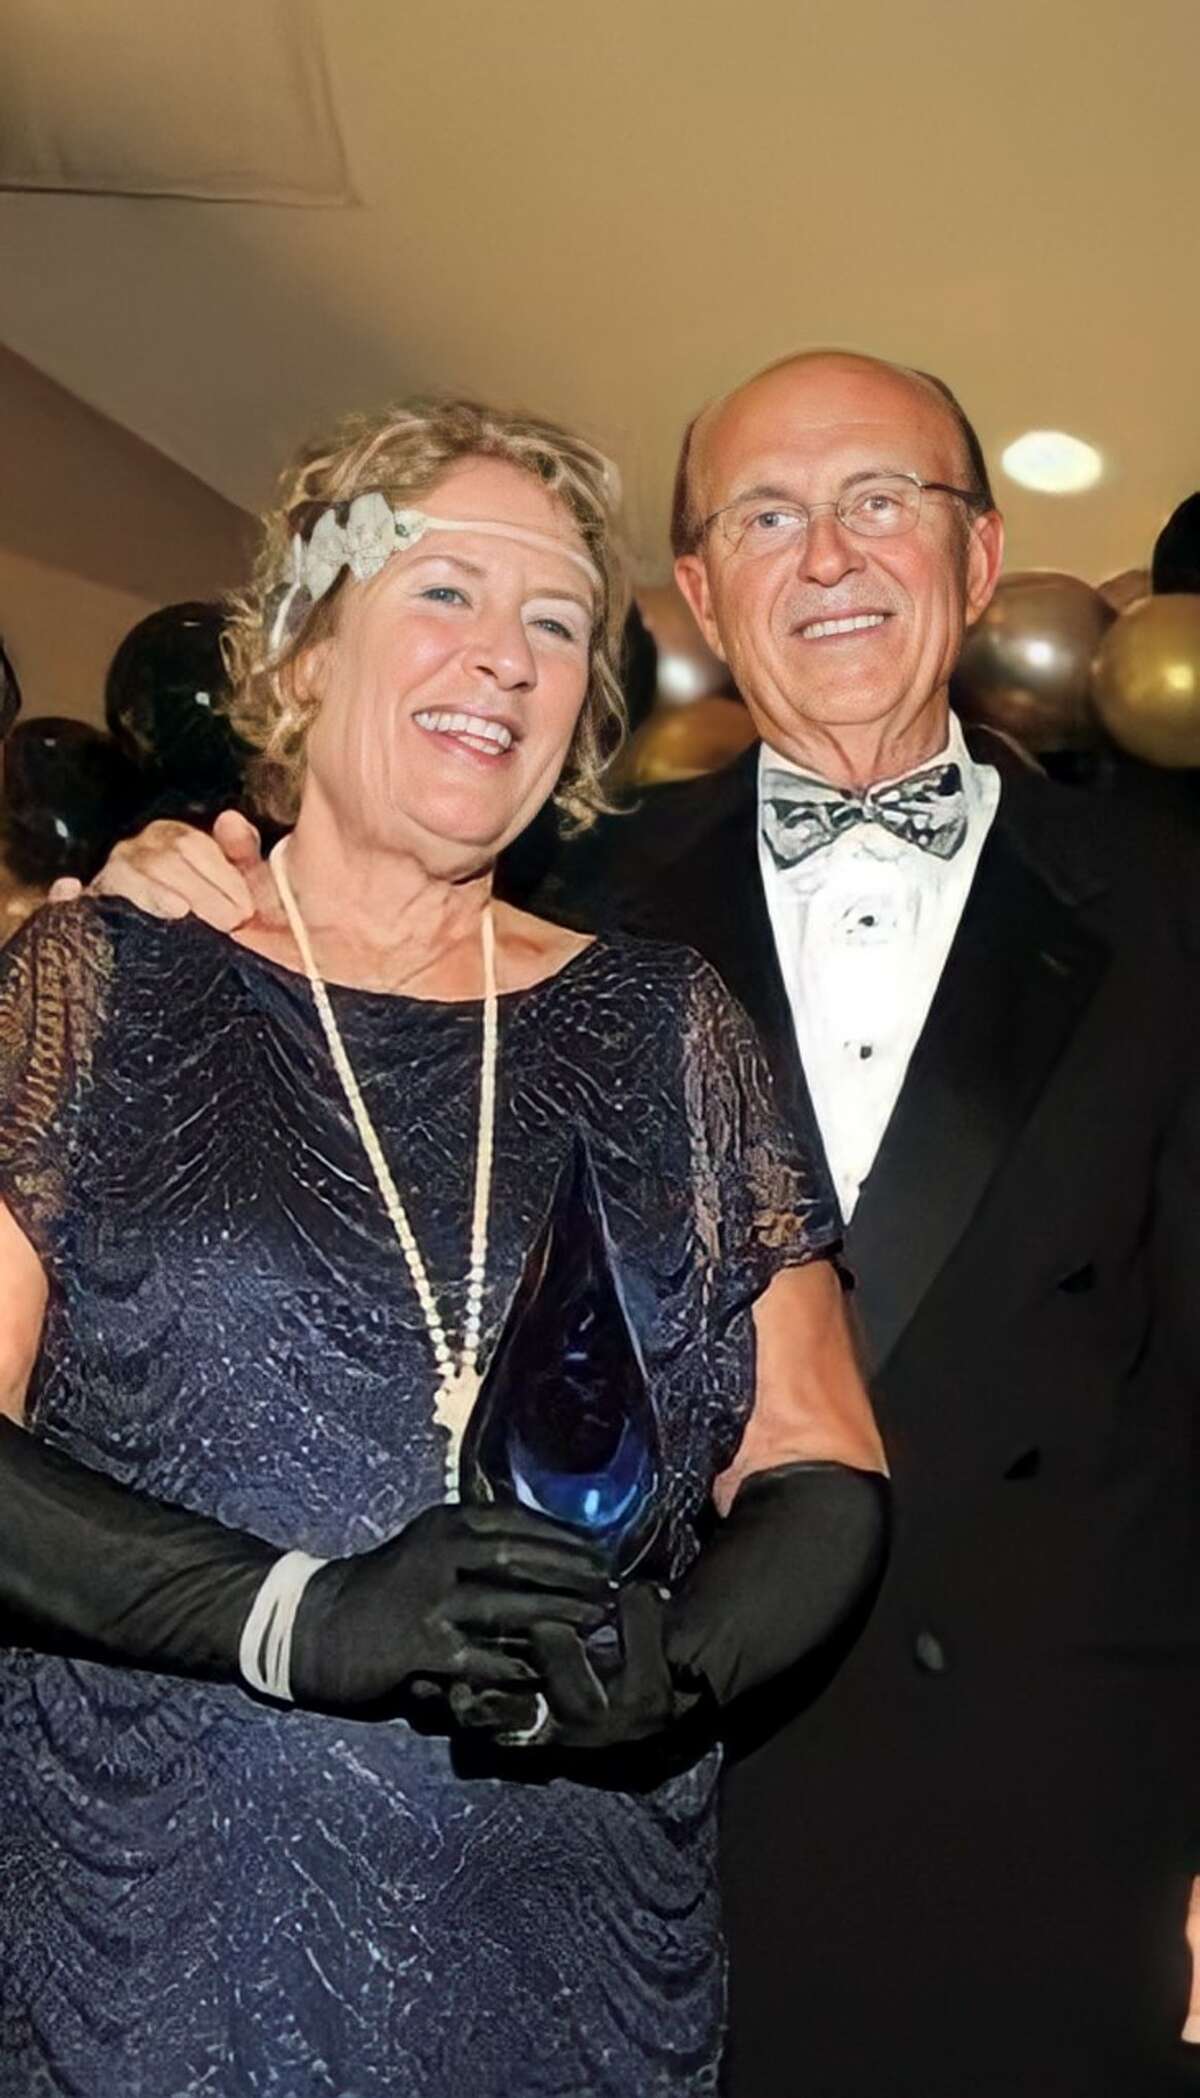 The Fabaz Family Endowment will support healthcare education at West Shore Community College. Dr. Anthony and Candace Fabaz were recently awarded with the Justus and Paulina Stearns award a legacy honor given by Spectrum Health Foundation Ludington Hospital.